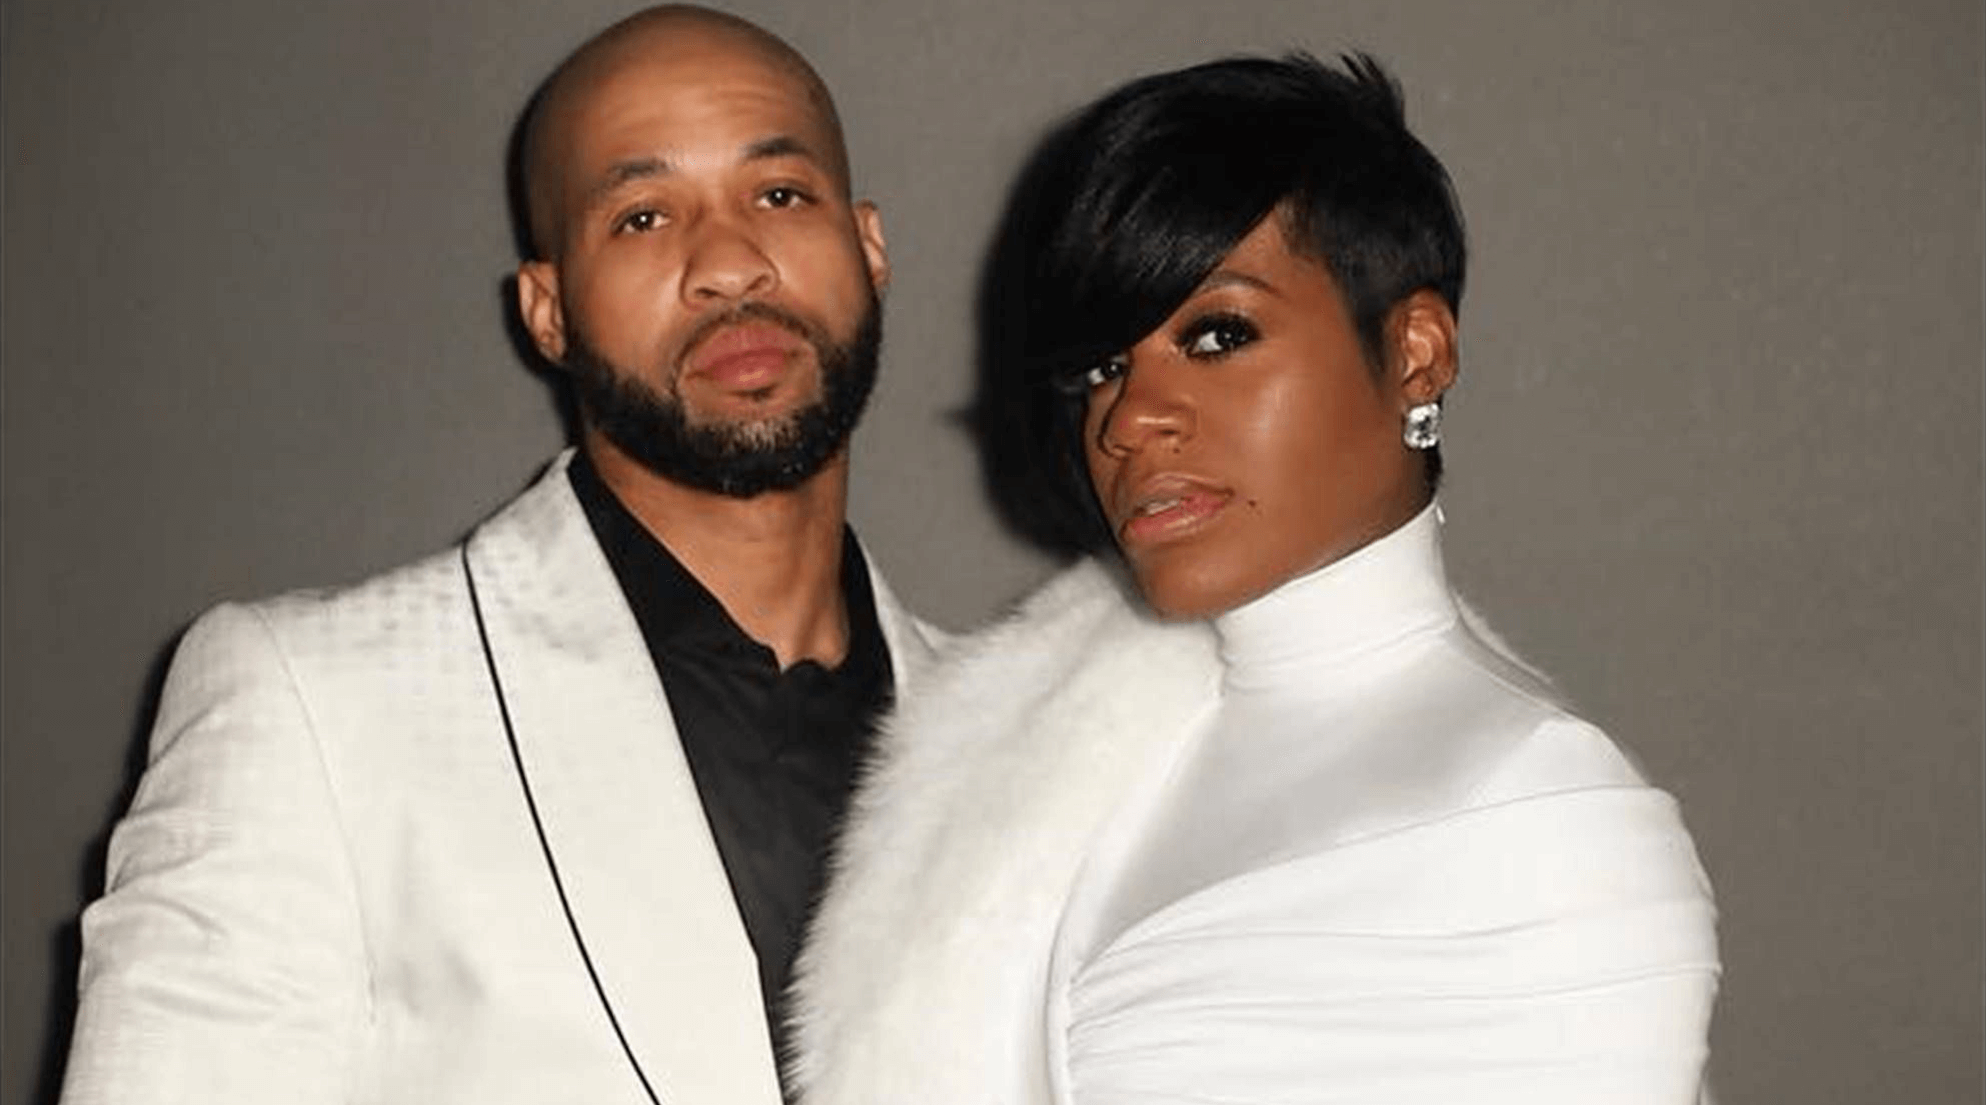 ‘American Idol’ Alum Fantasia Barrino Is Pregnant Years After Struggling To Conceive!